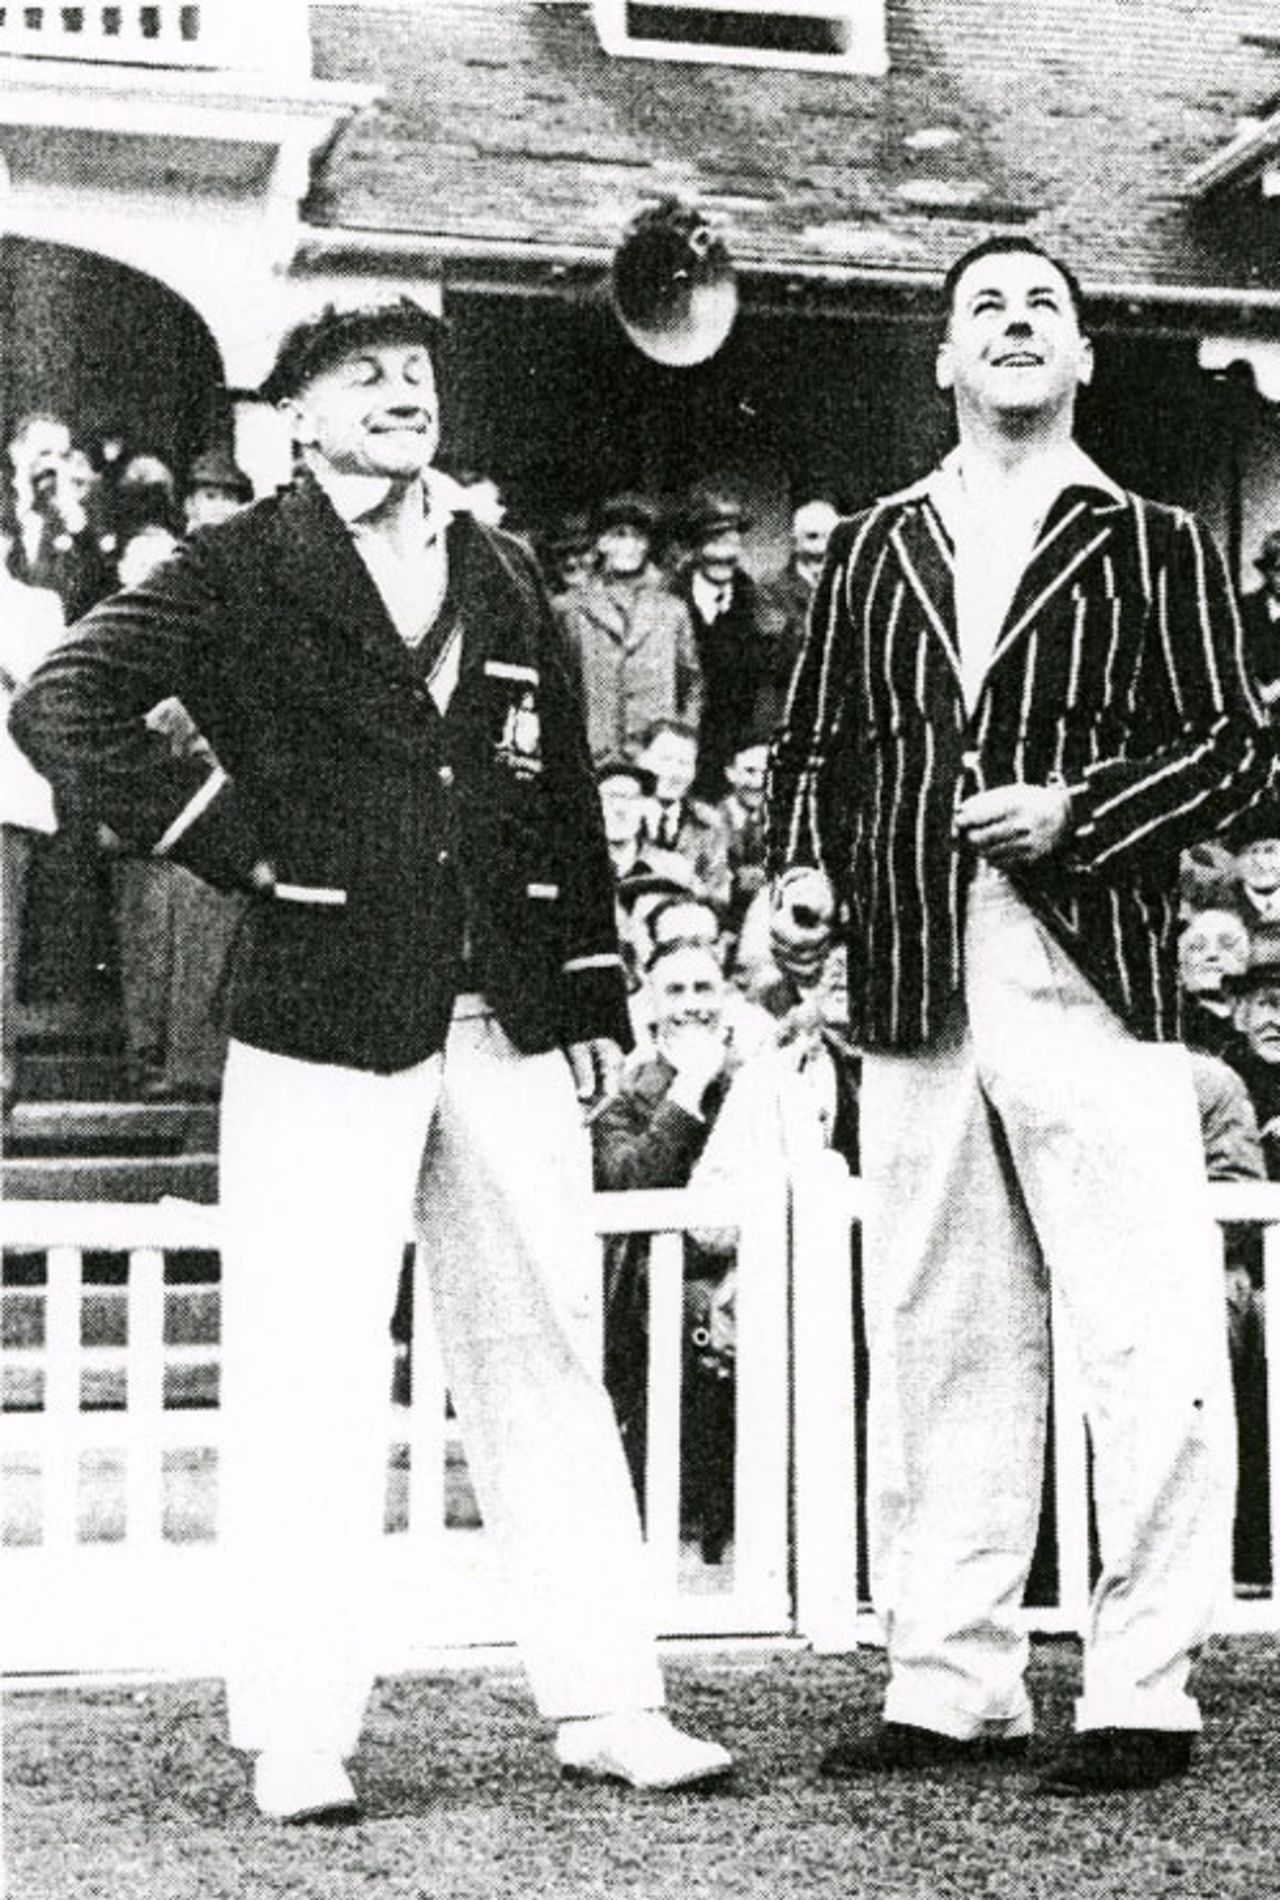 Don Bradman starts his fourth and final tour of England by tossing with Worcestershire captain Allan White, Worcestershire v Australians, Worcester, April 28, 1948